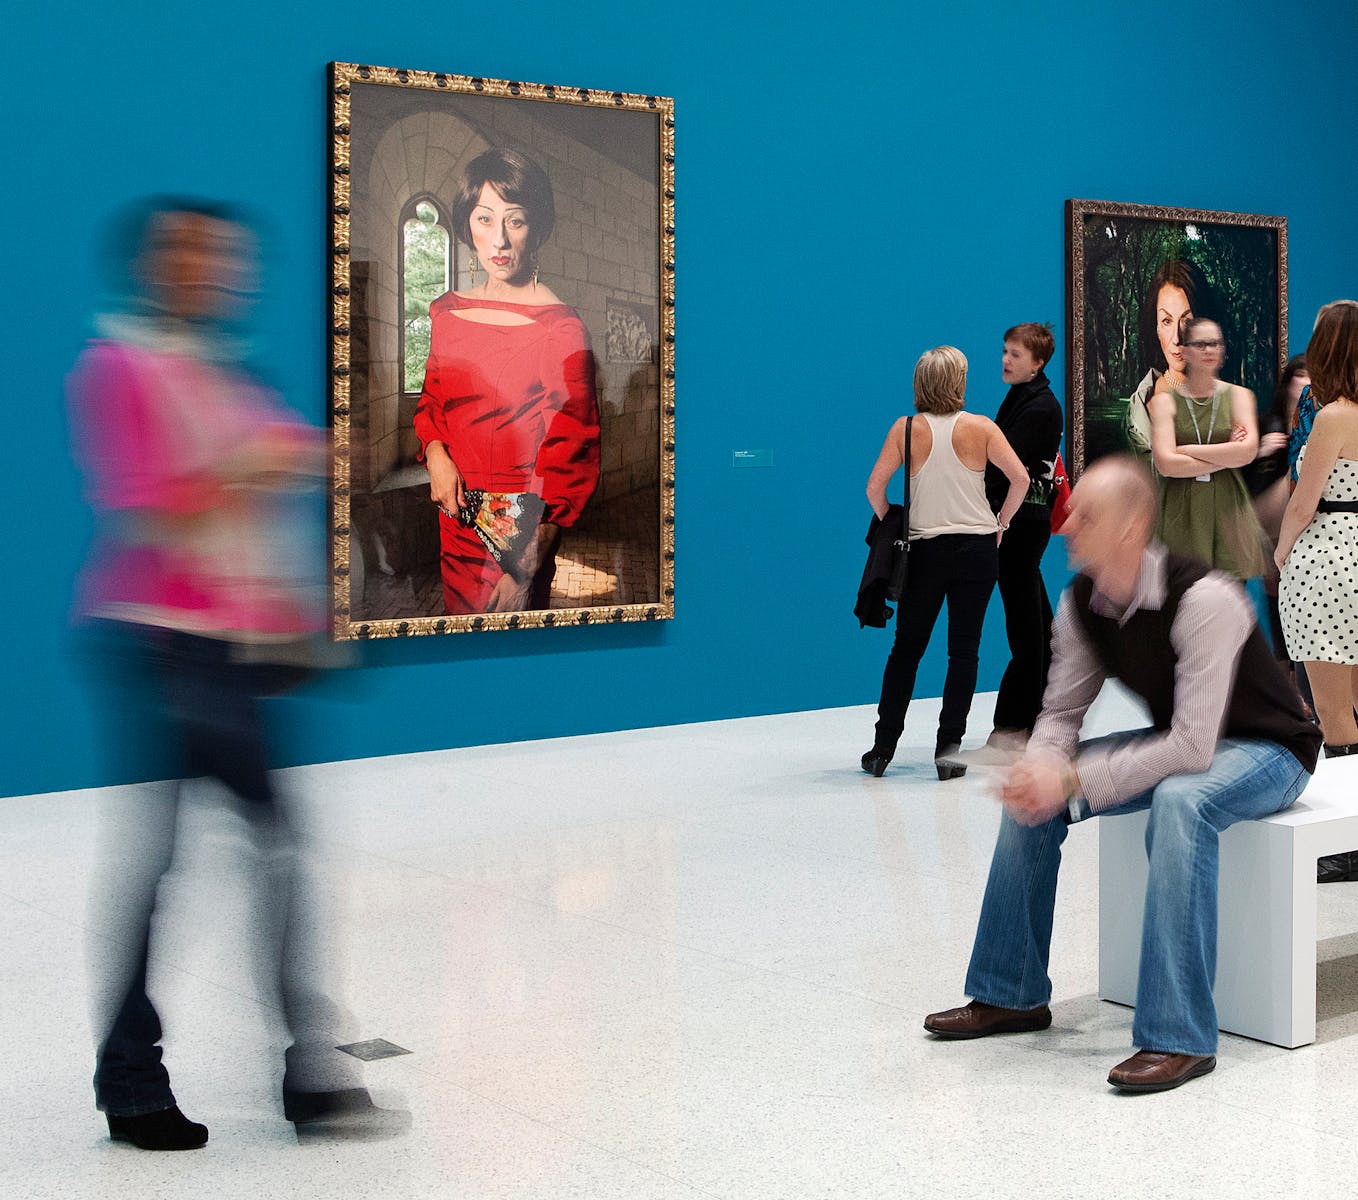 Cindy Sherman' a retrospective exhibition, opens today at the